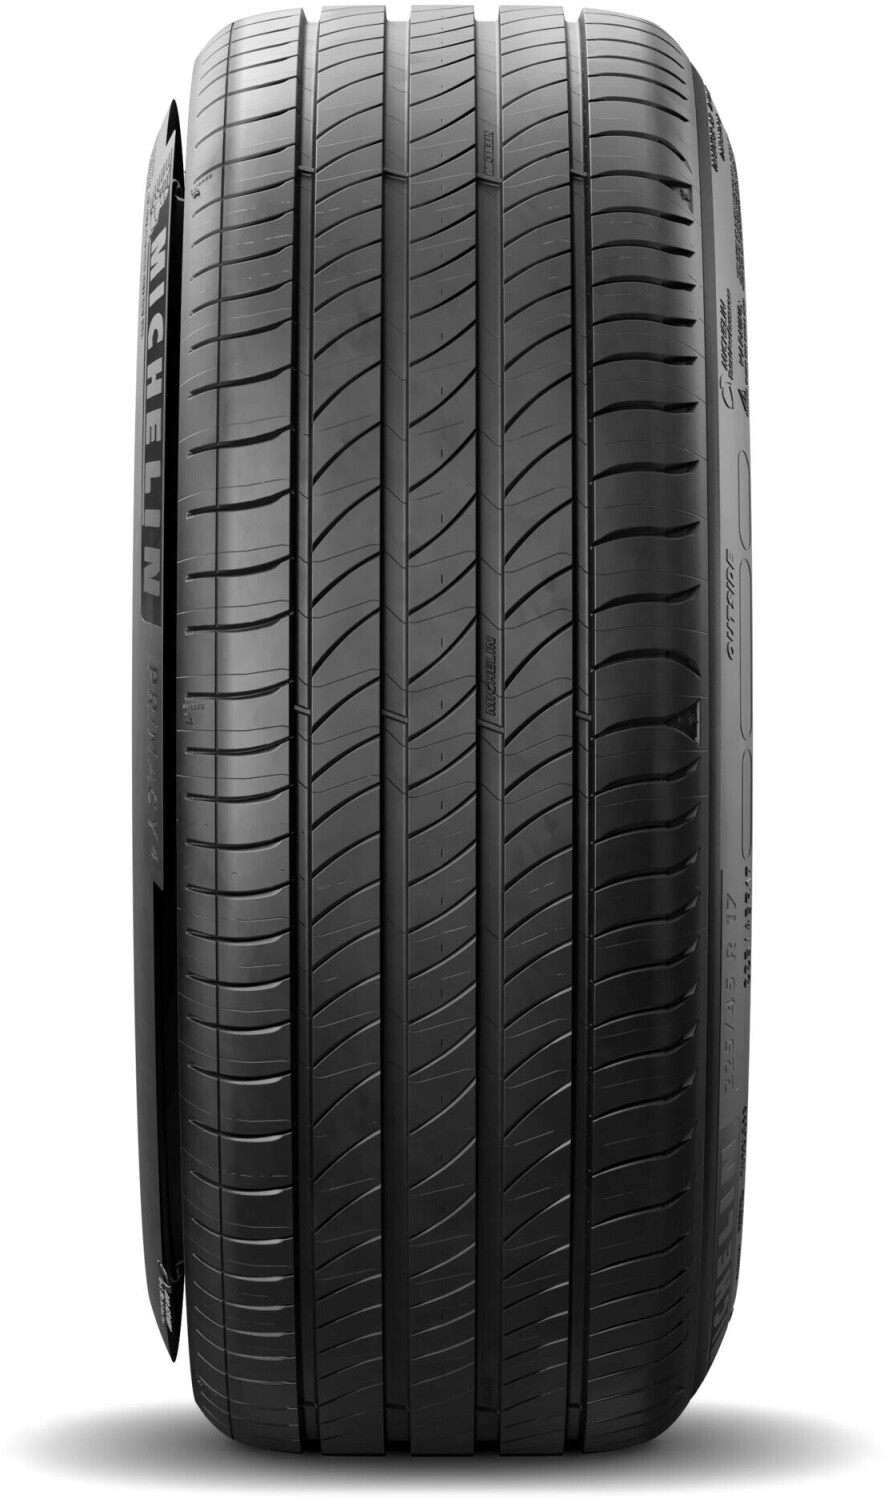 Michelin XL £108.51 on 4 R17 S1 (Today) 225/45 94V Buy from Best – Deals Primacy